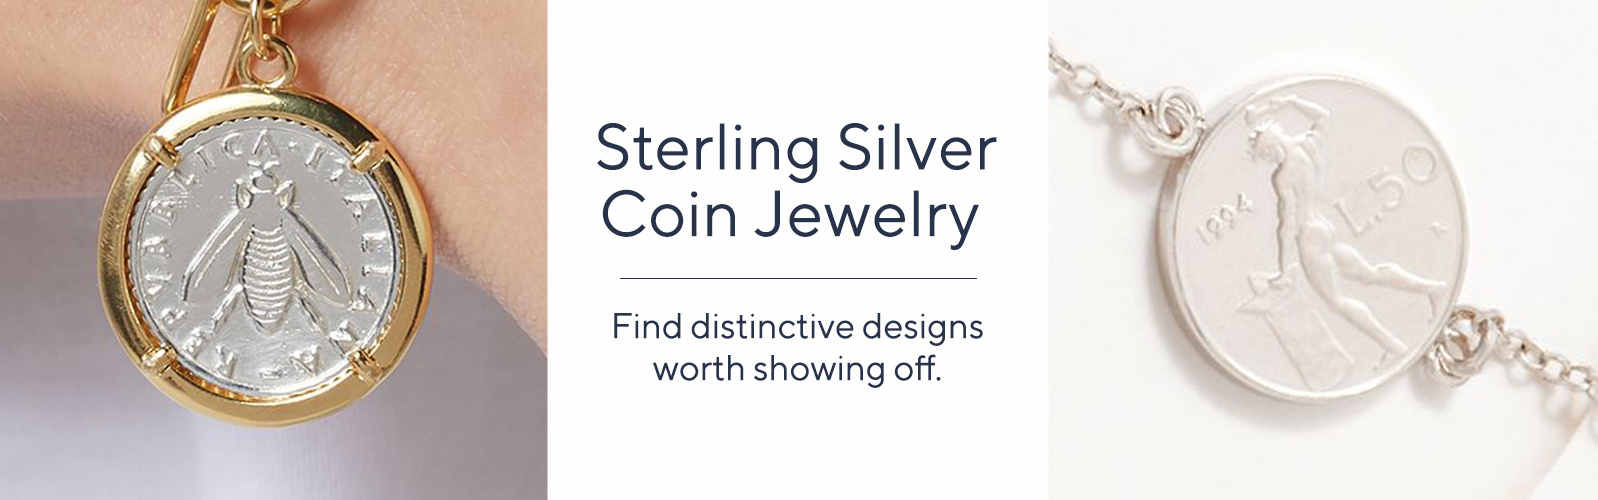 Sterling Silver Coin Jewelry   Find distinctive designs worth showing off.